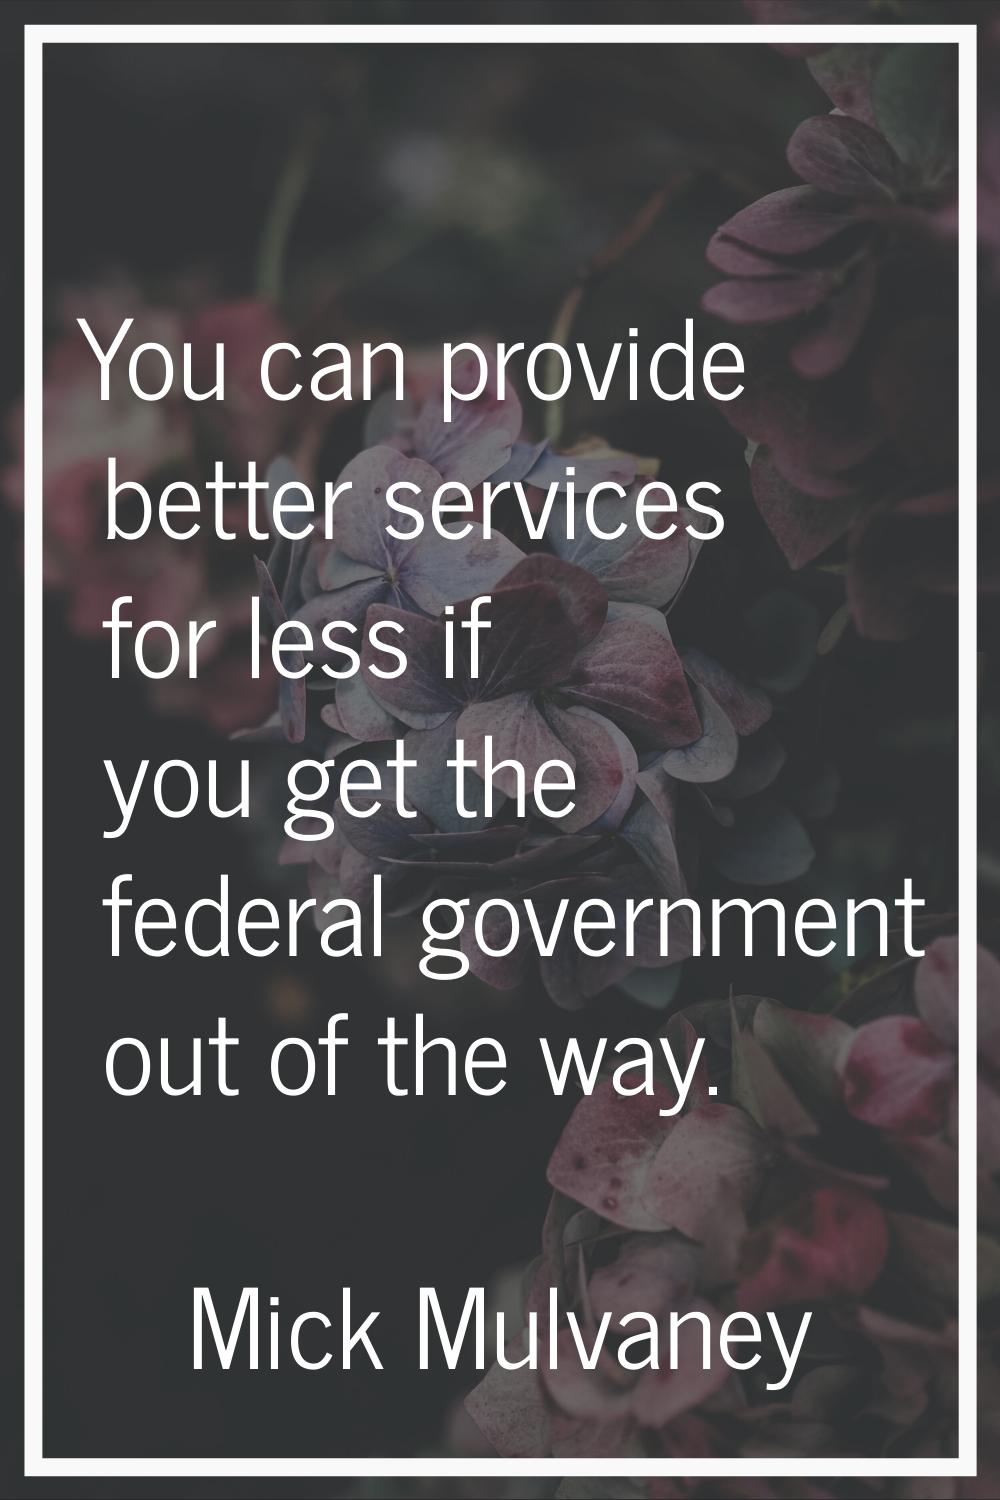 You can provide better services for less if you get the federal government out of the way.